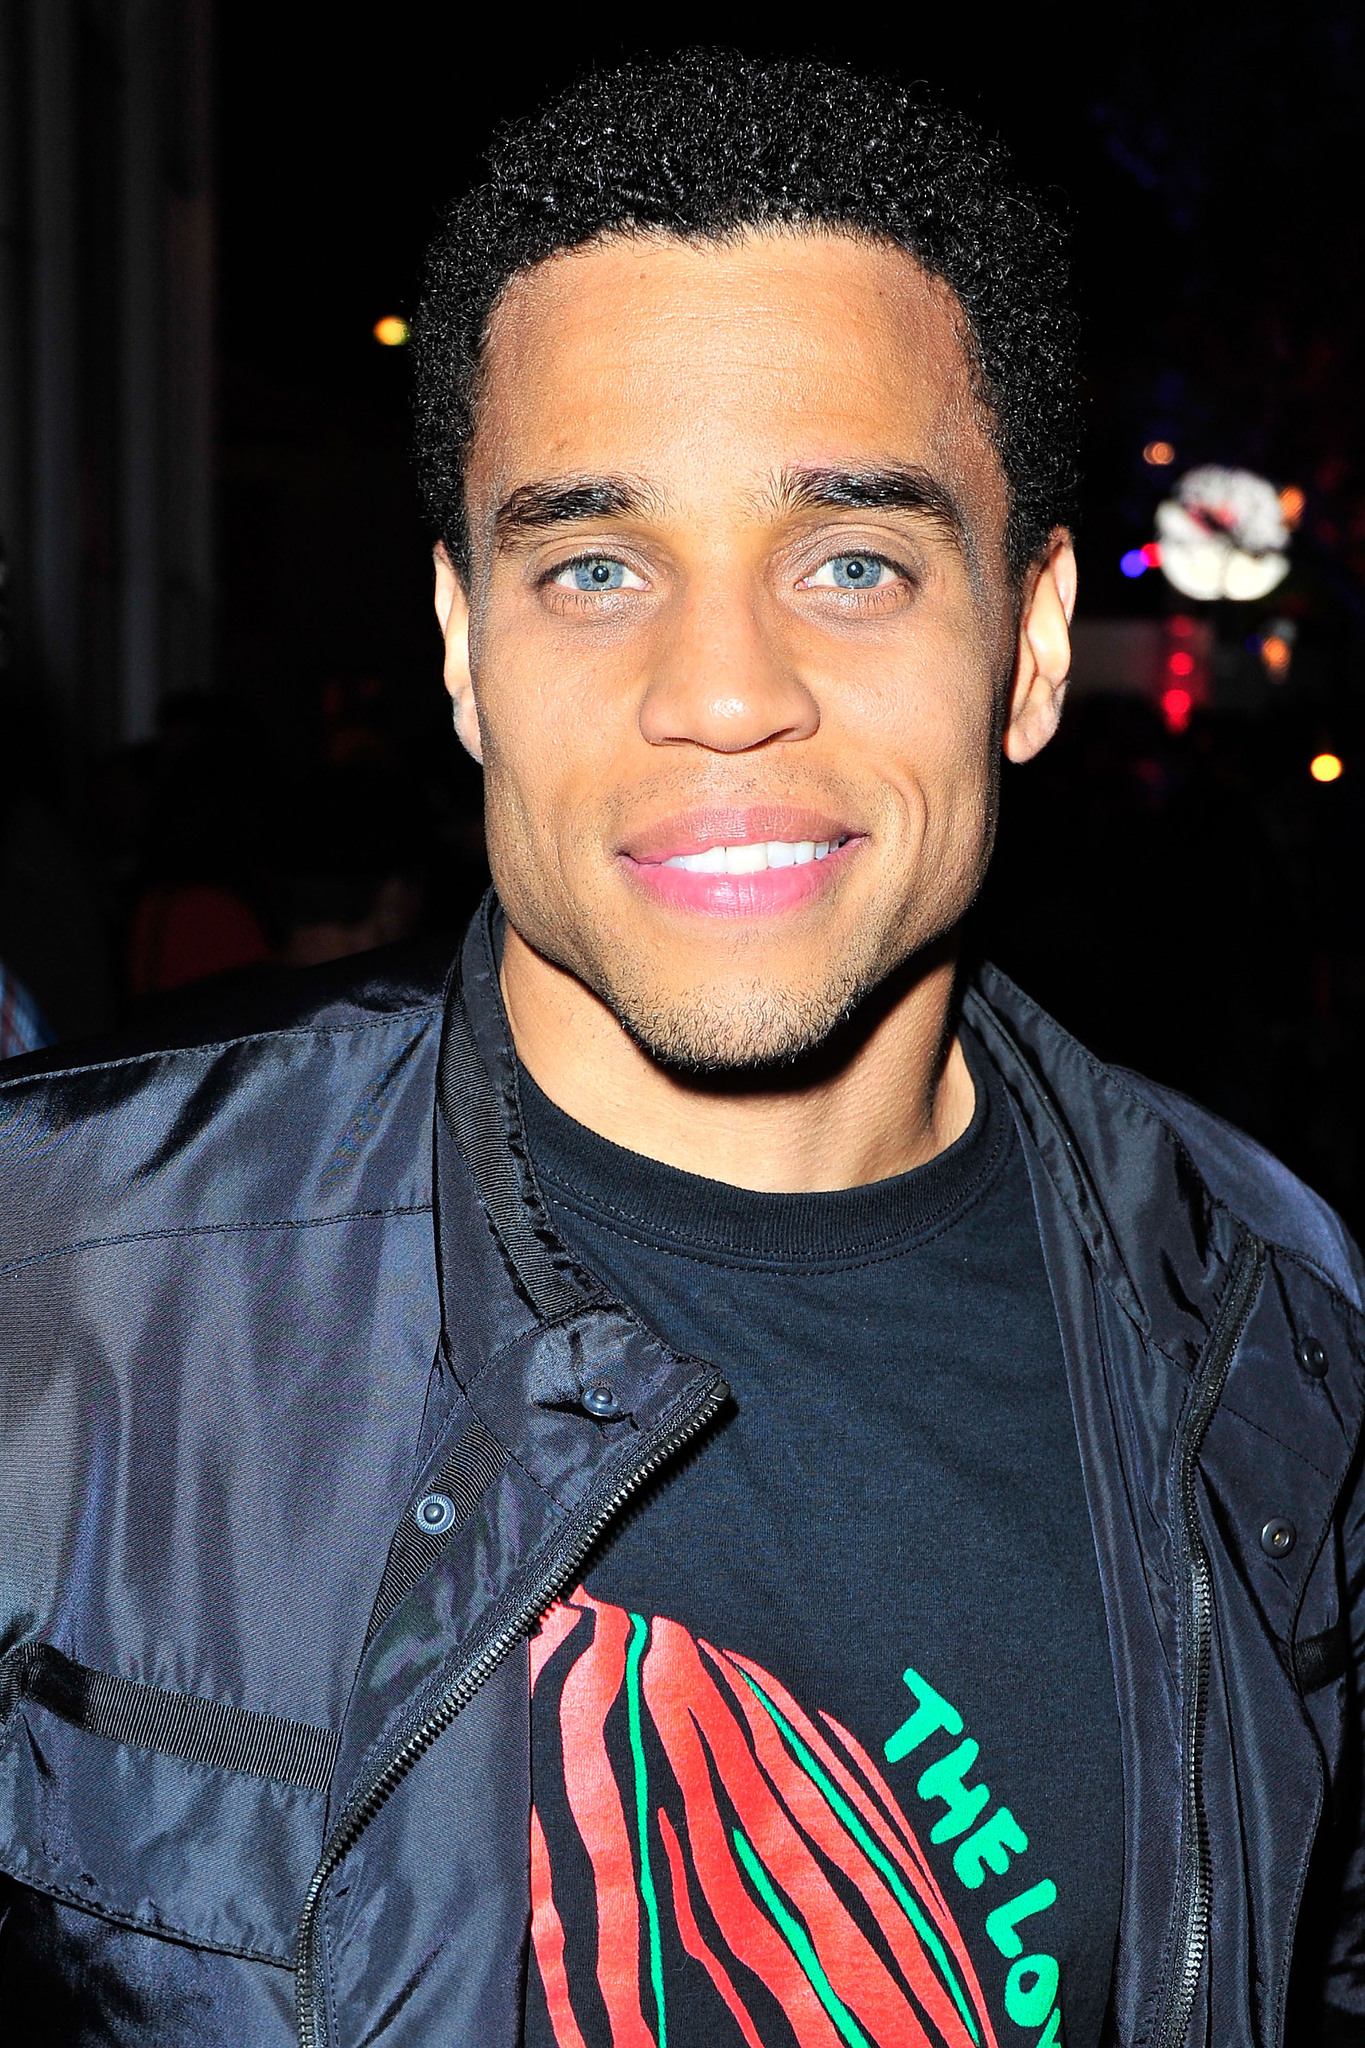 Michael Ealy at event of Zmogus is plieno (2013)